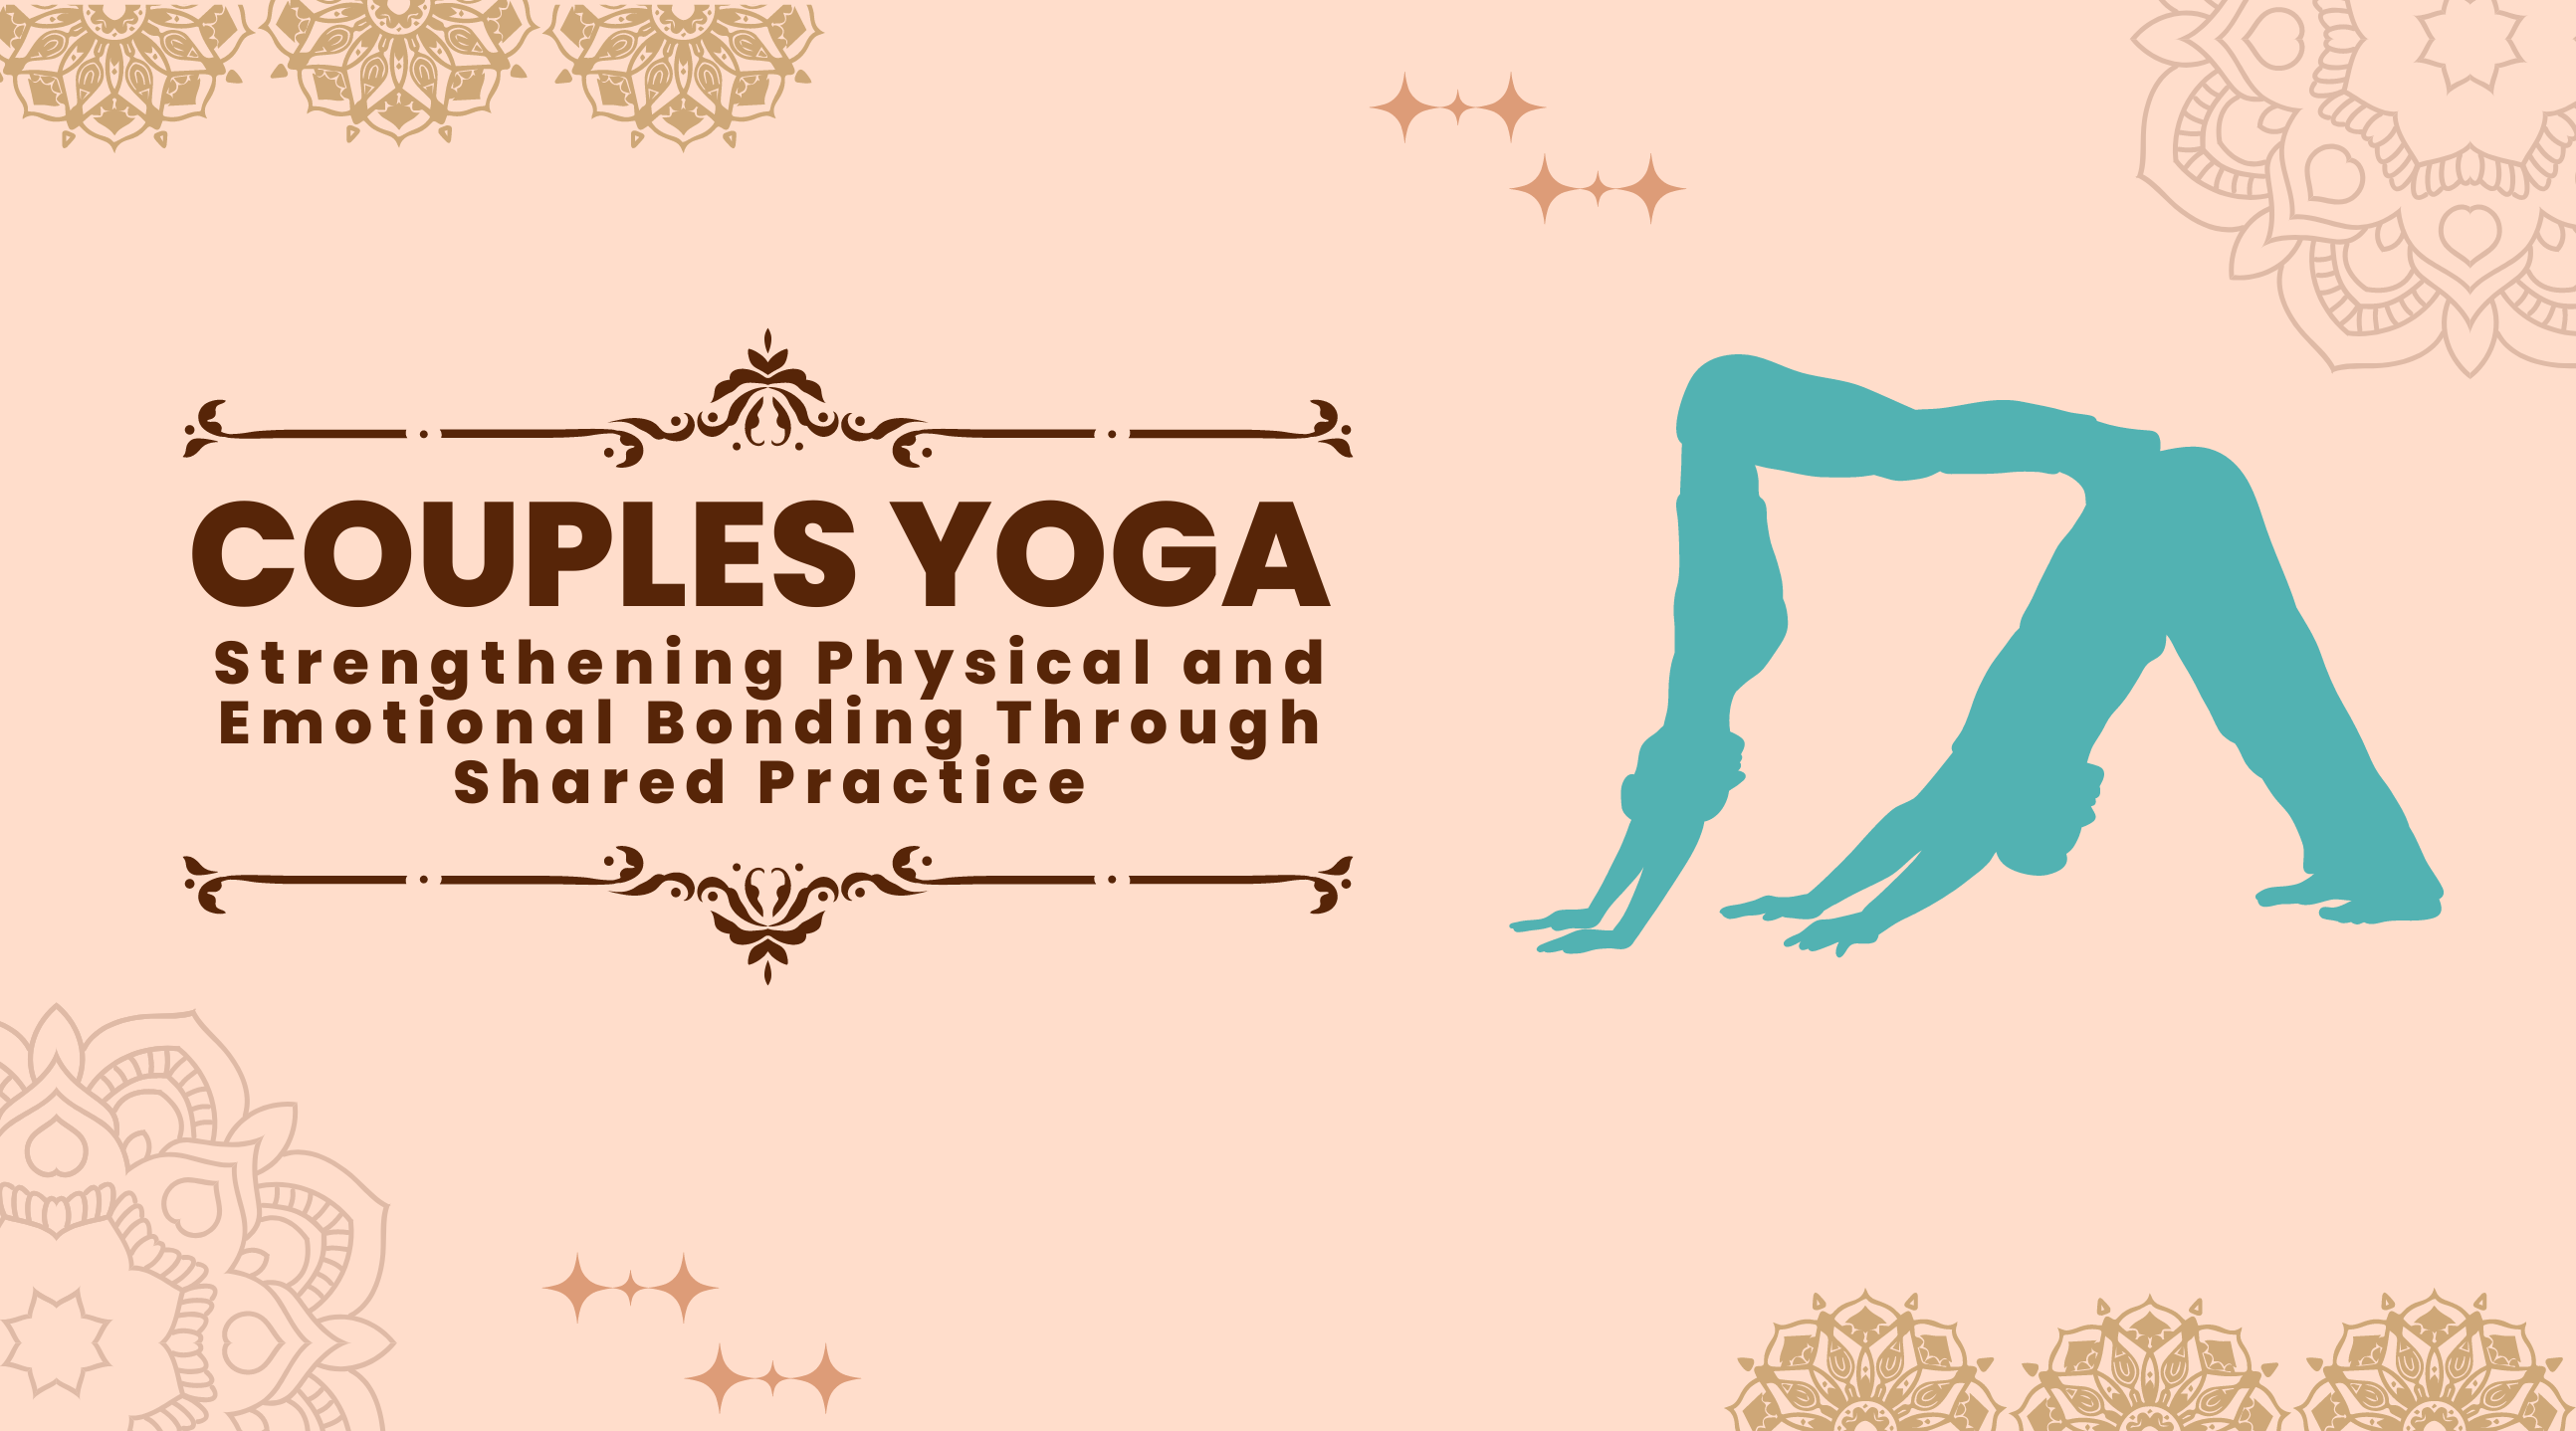 Couples Yoga: Strengthening Physical and Emotional Bonding Through Shared Practice